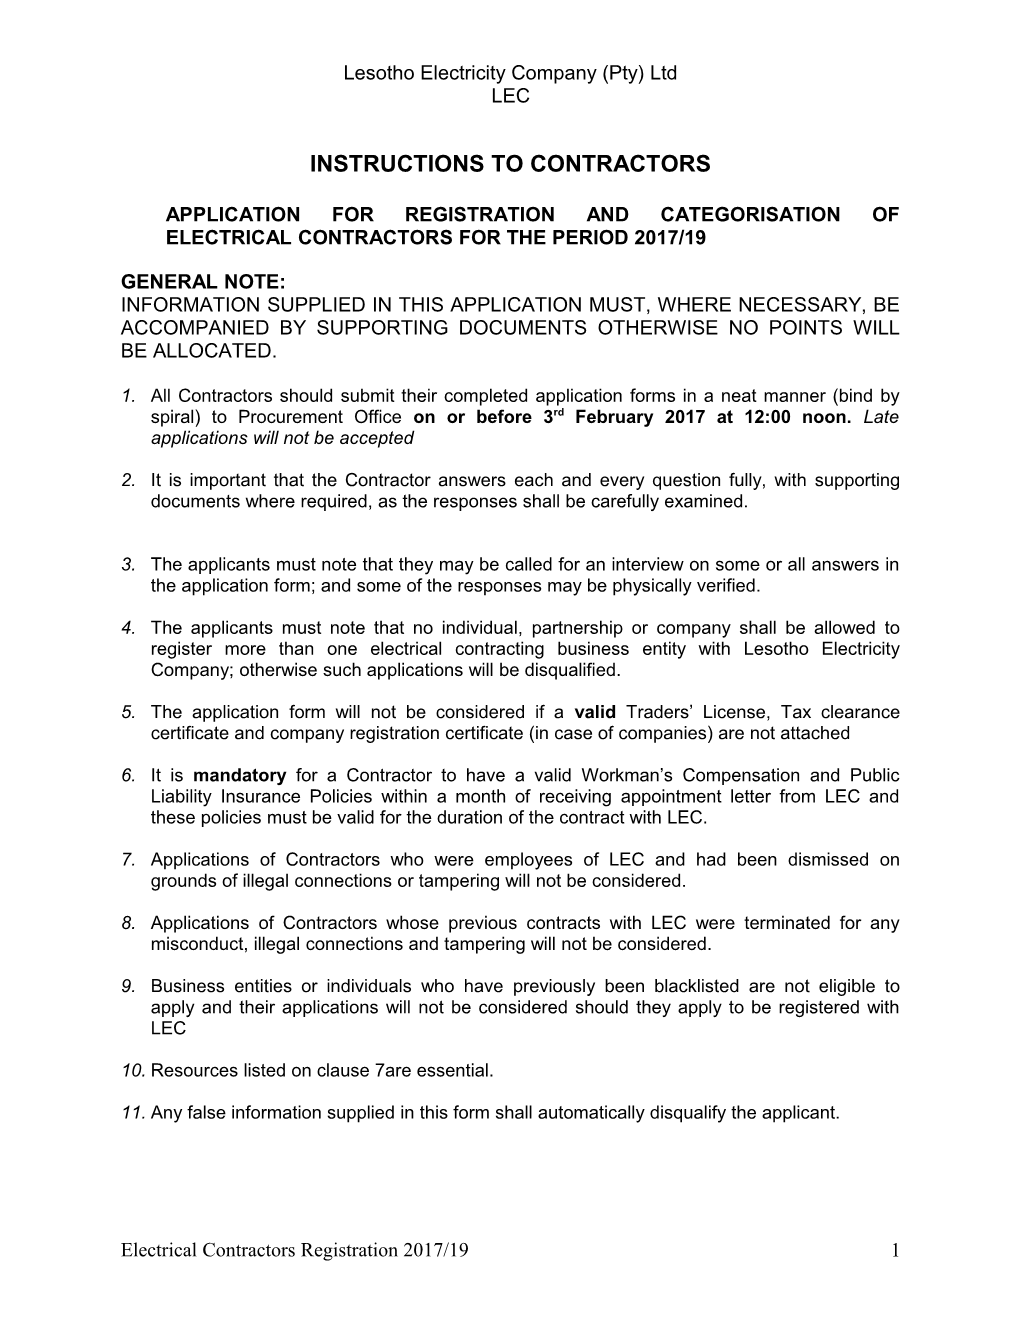 Application for Regestration and Categorisation of Electrical Contractors